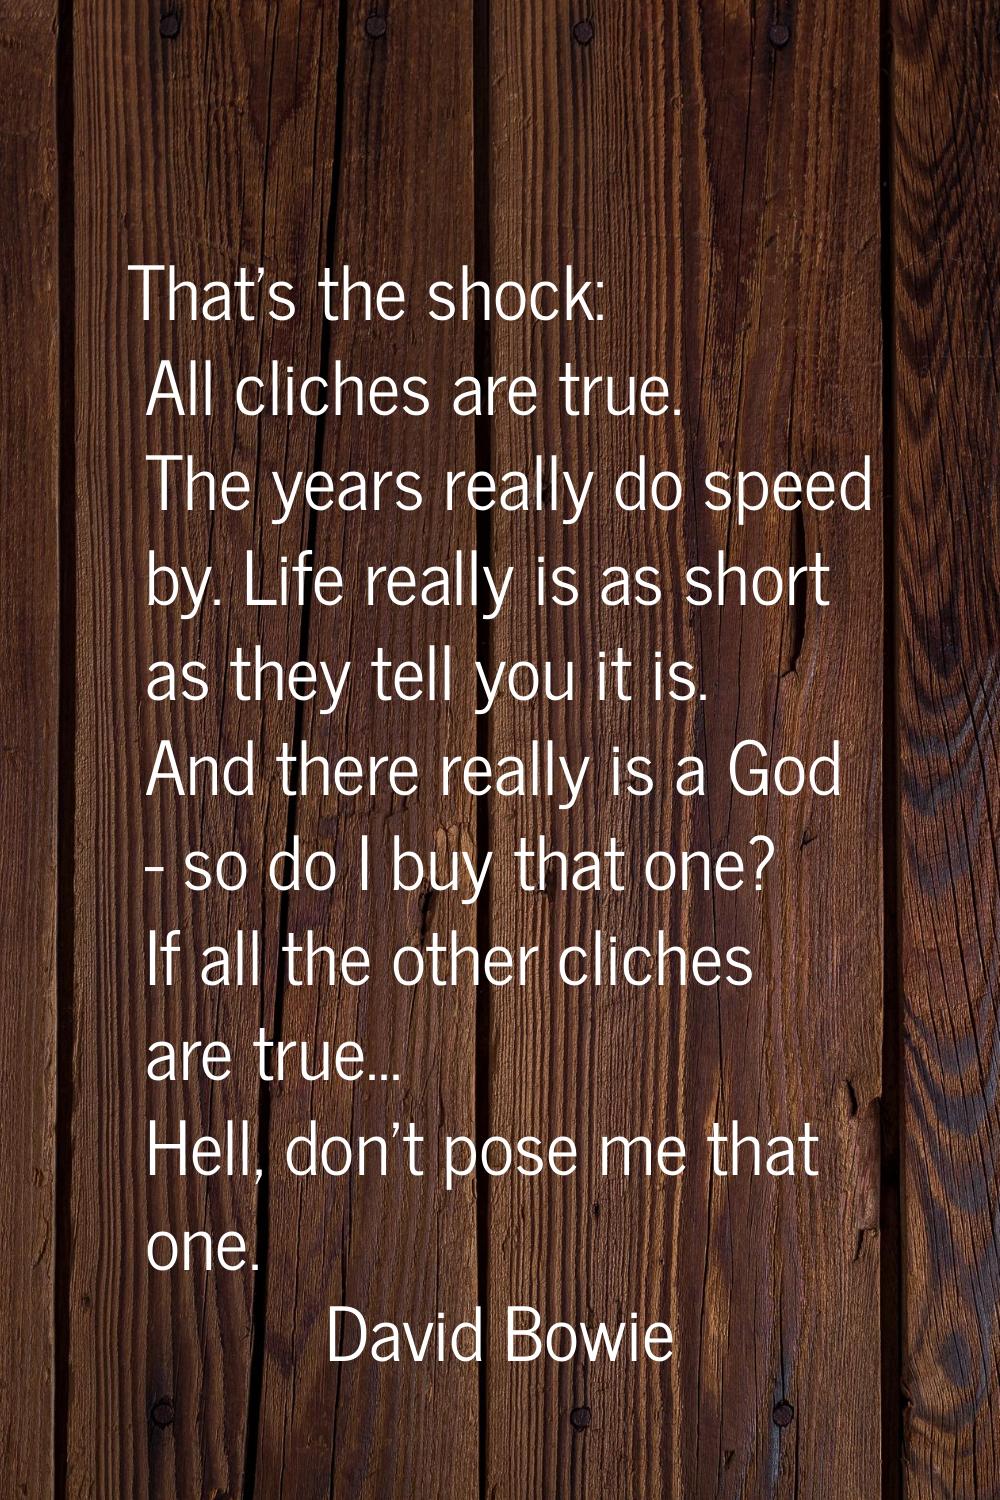 That's the shock: All cliches are true. The years really do speed by. Life really is as short as th